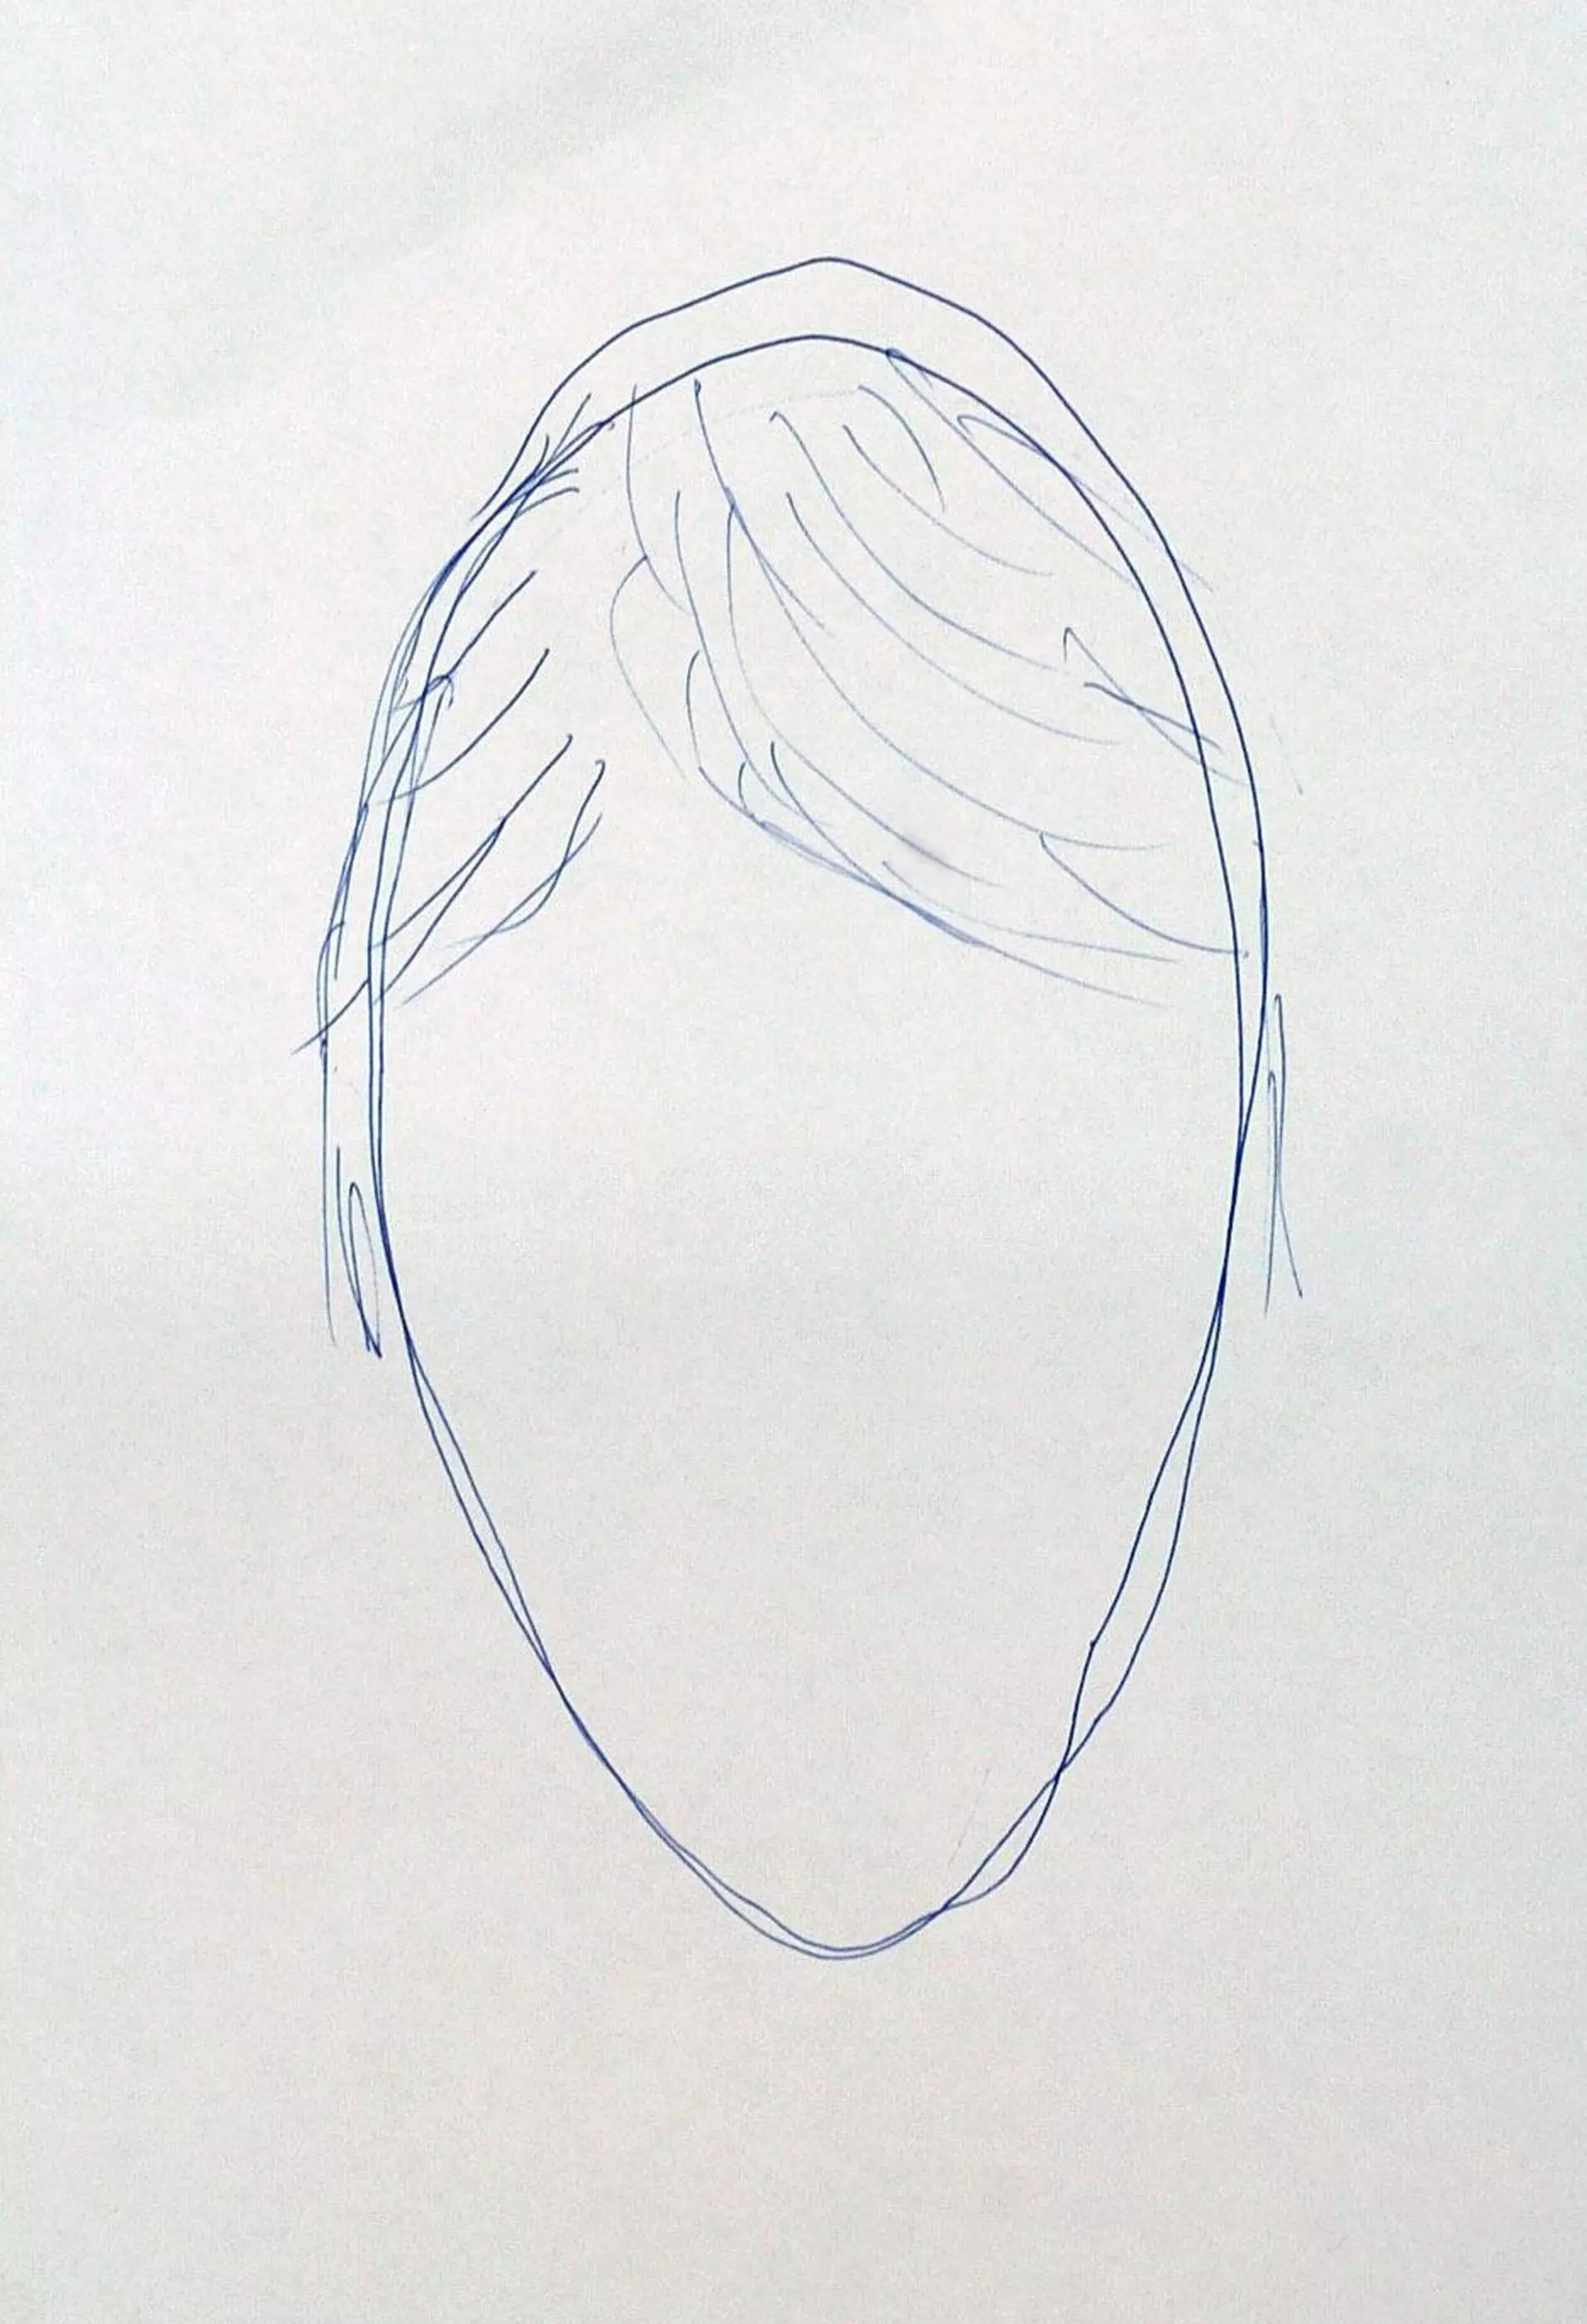 This drawing was made from memory by Brit Simon Russell back in 2007, after being shown it by cops working on the case.